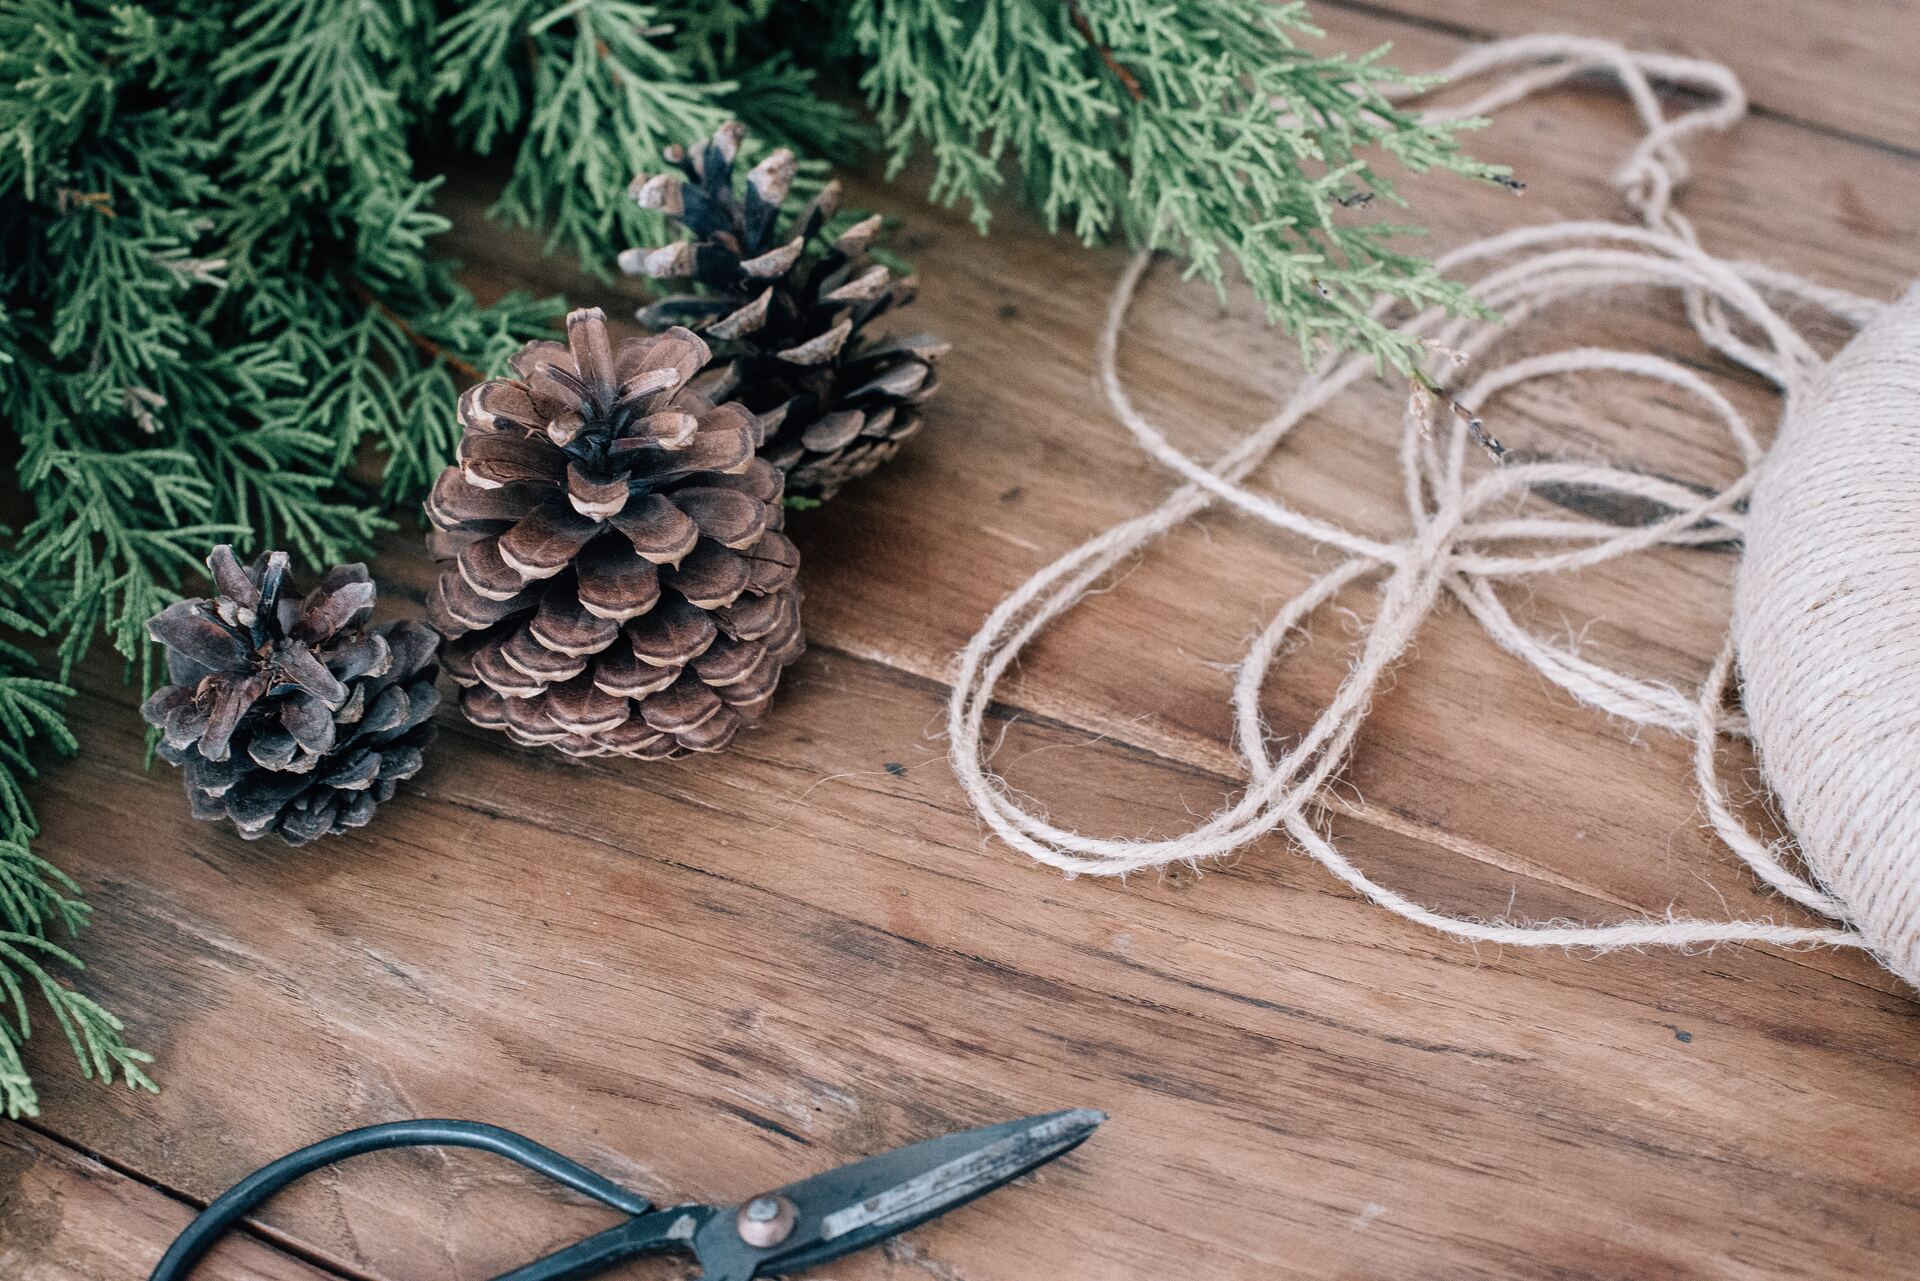 Scissors, twine, and pine cones on wooden table.